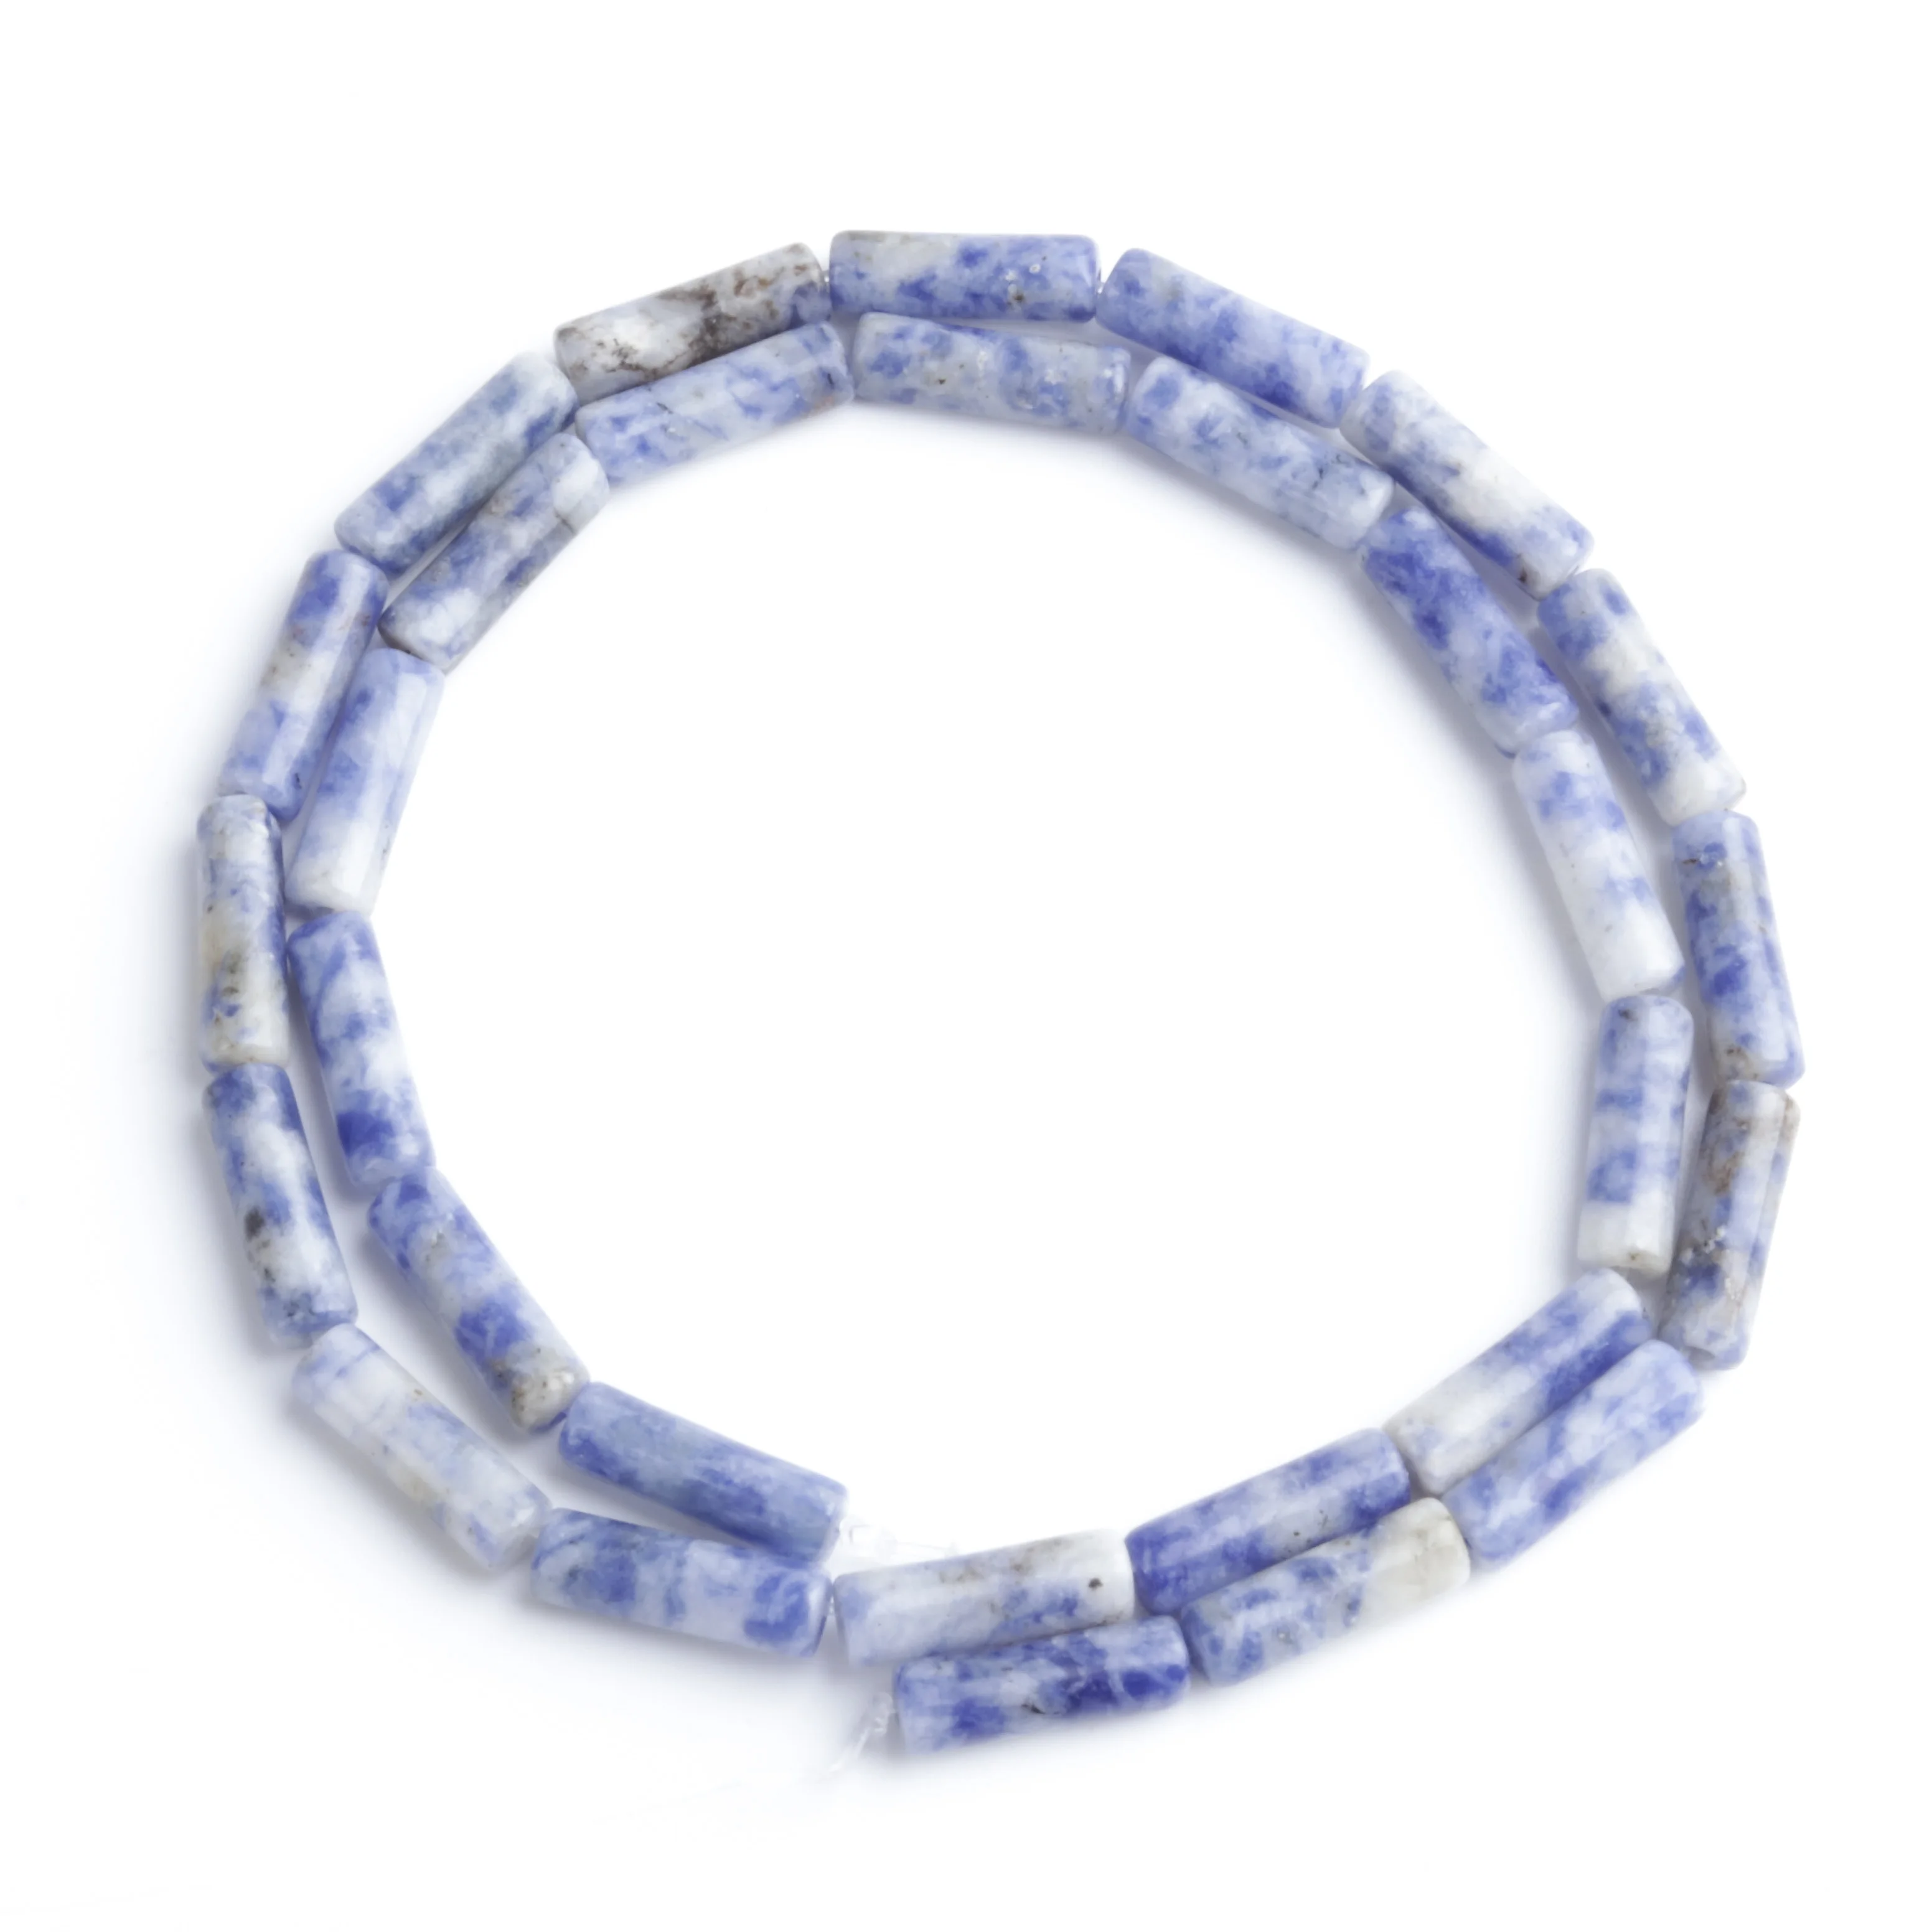 

Natural Stone 4x13mm Blue Dot Bucket Beads Cylindrical Beads Loosely Spaced Bead Septa Beads DIY Necklace Bracelets Earrings